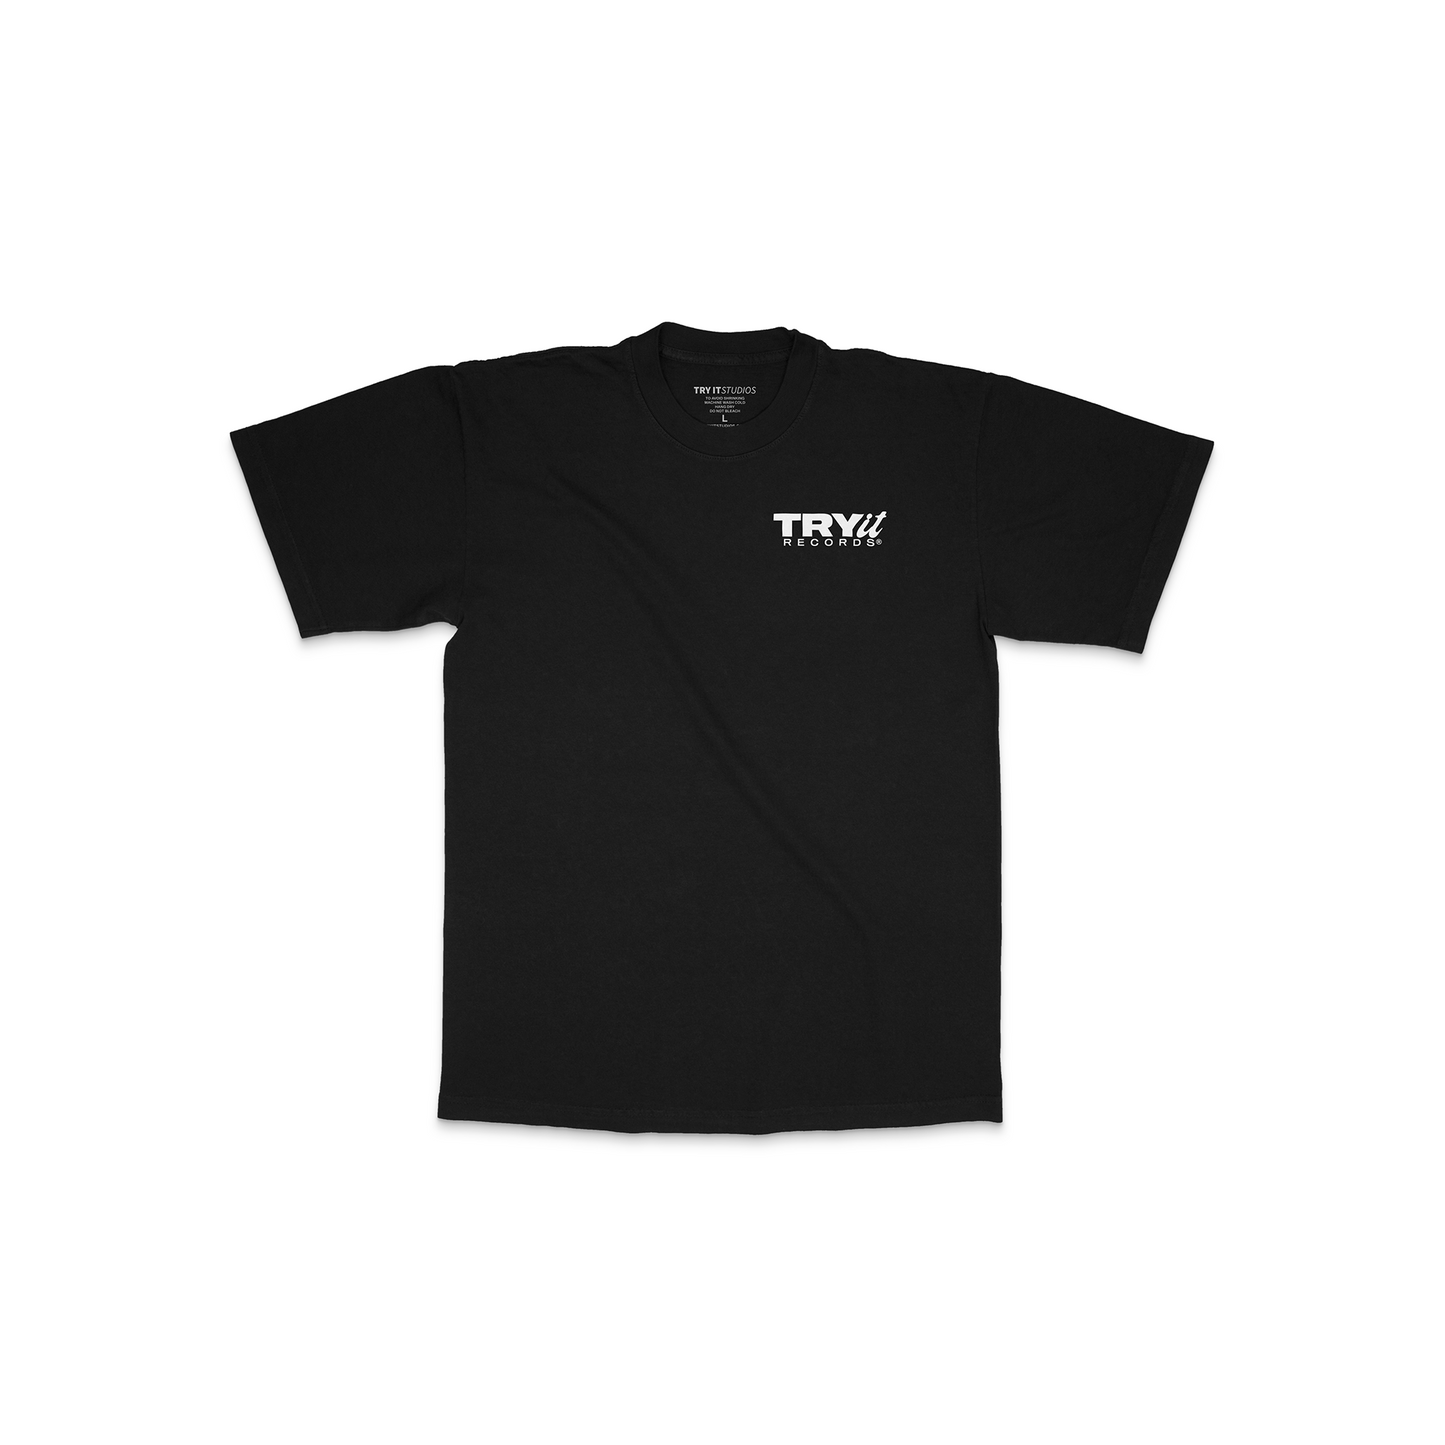 Try it Records Tee (Black)